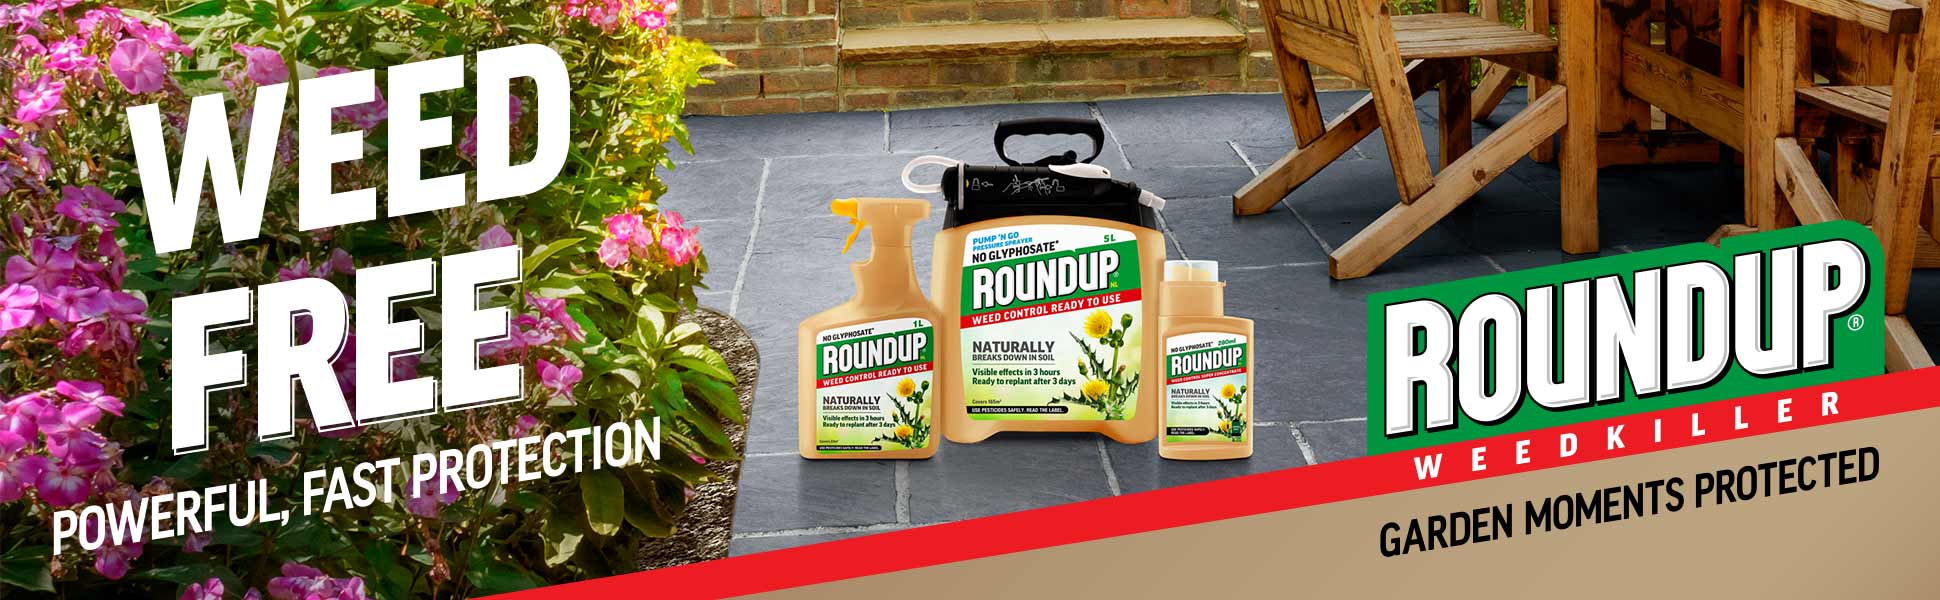 Roundup® NL Weed Control Ready To Use - Weed Free, Naturally